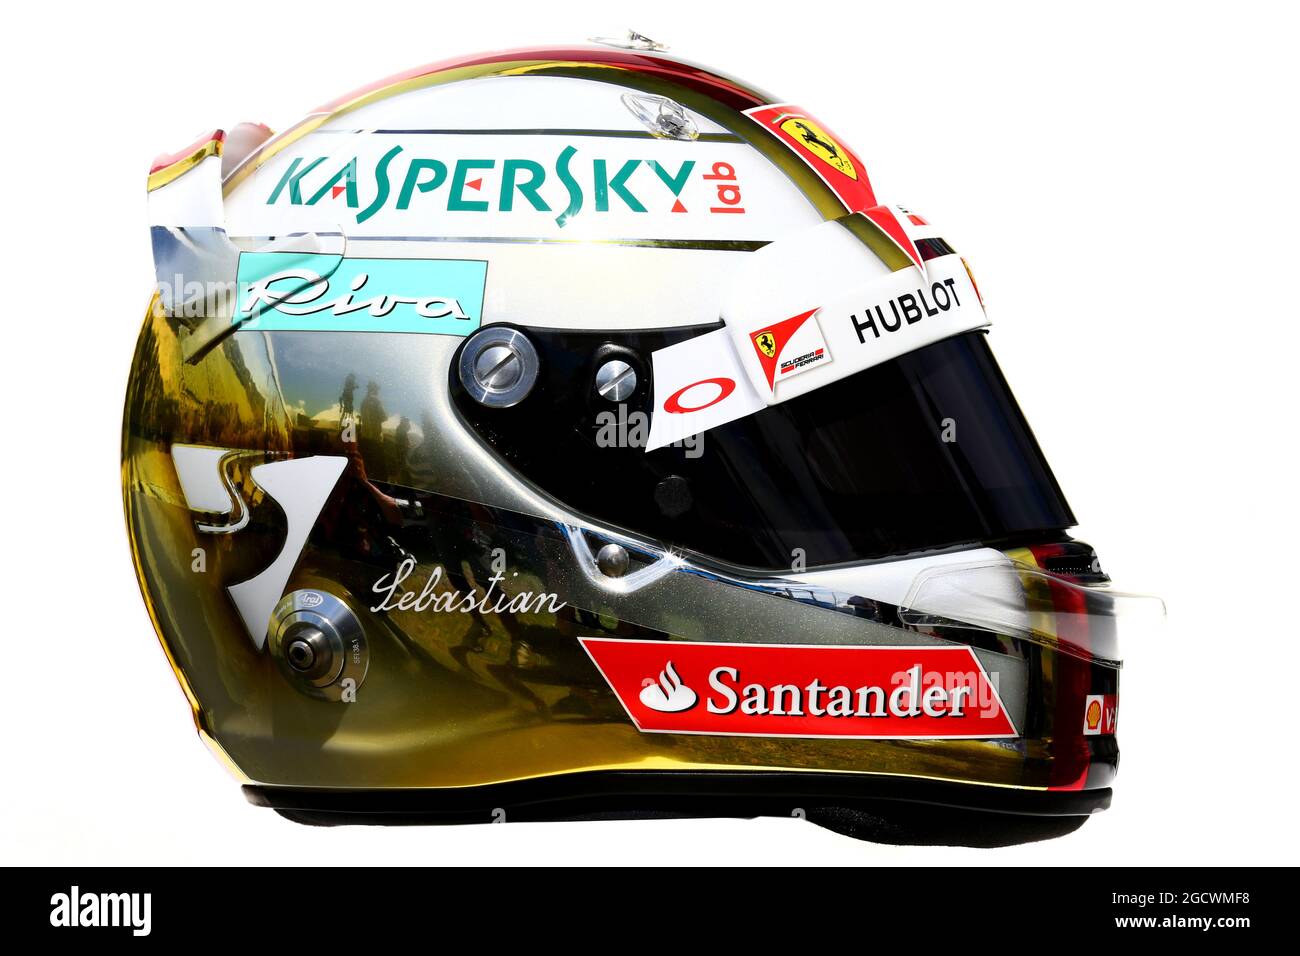 The helmet of sebastian vettel Cut Out Stock Images & Pictures - Alamy